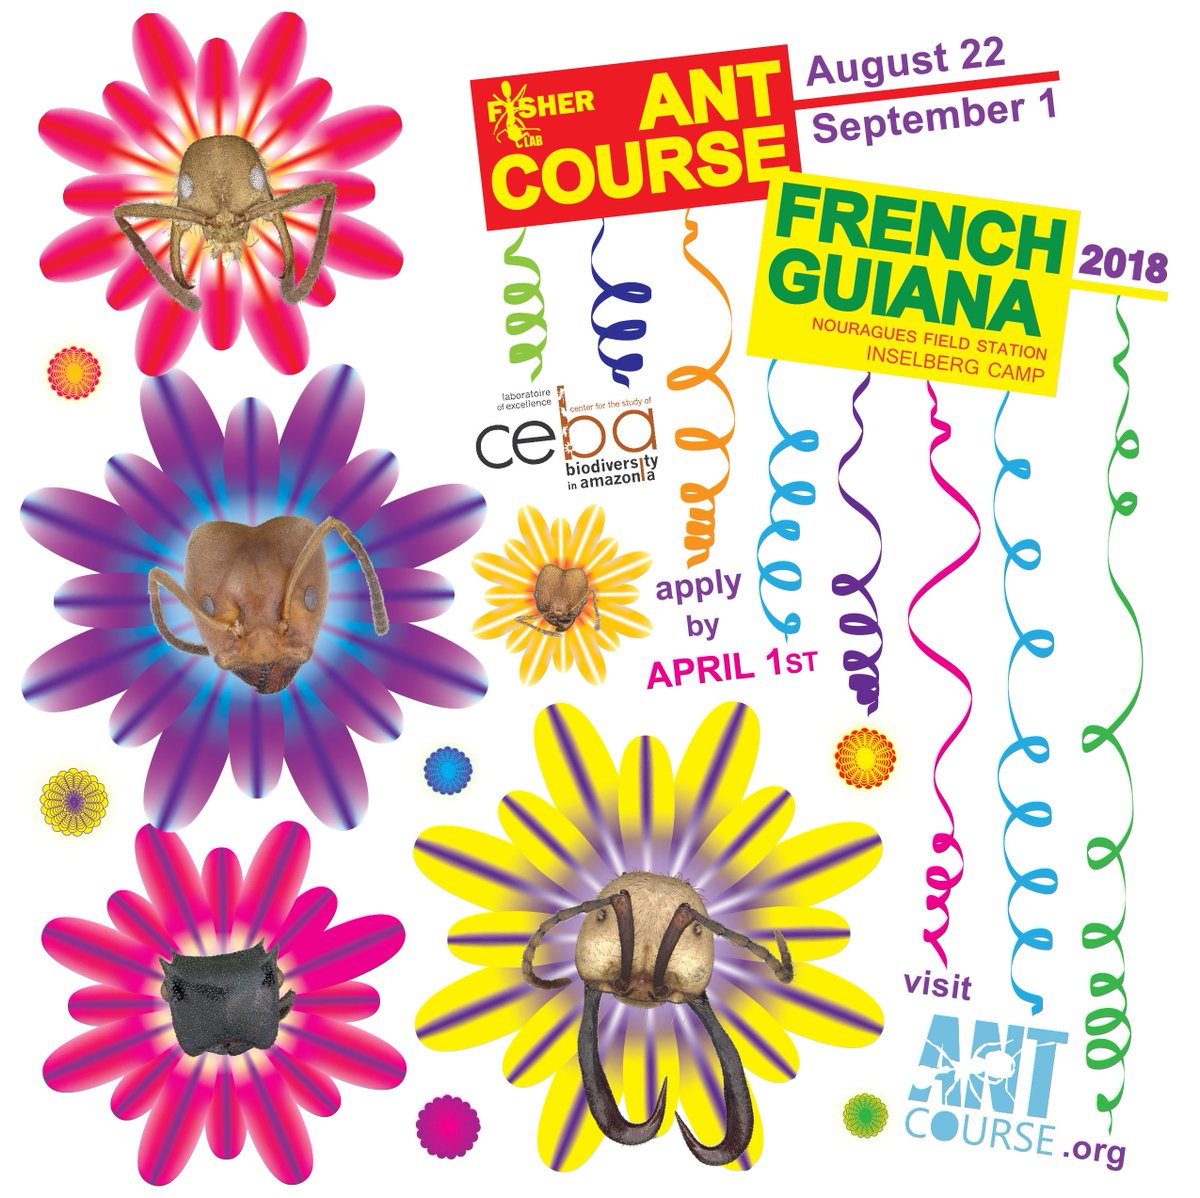 Apply Now: #AntCourse 2018 in French Guiana: no tuition!. Apply by April 1 antcourse.org